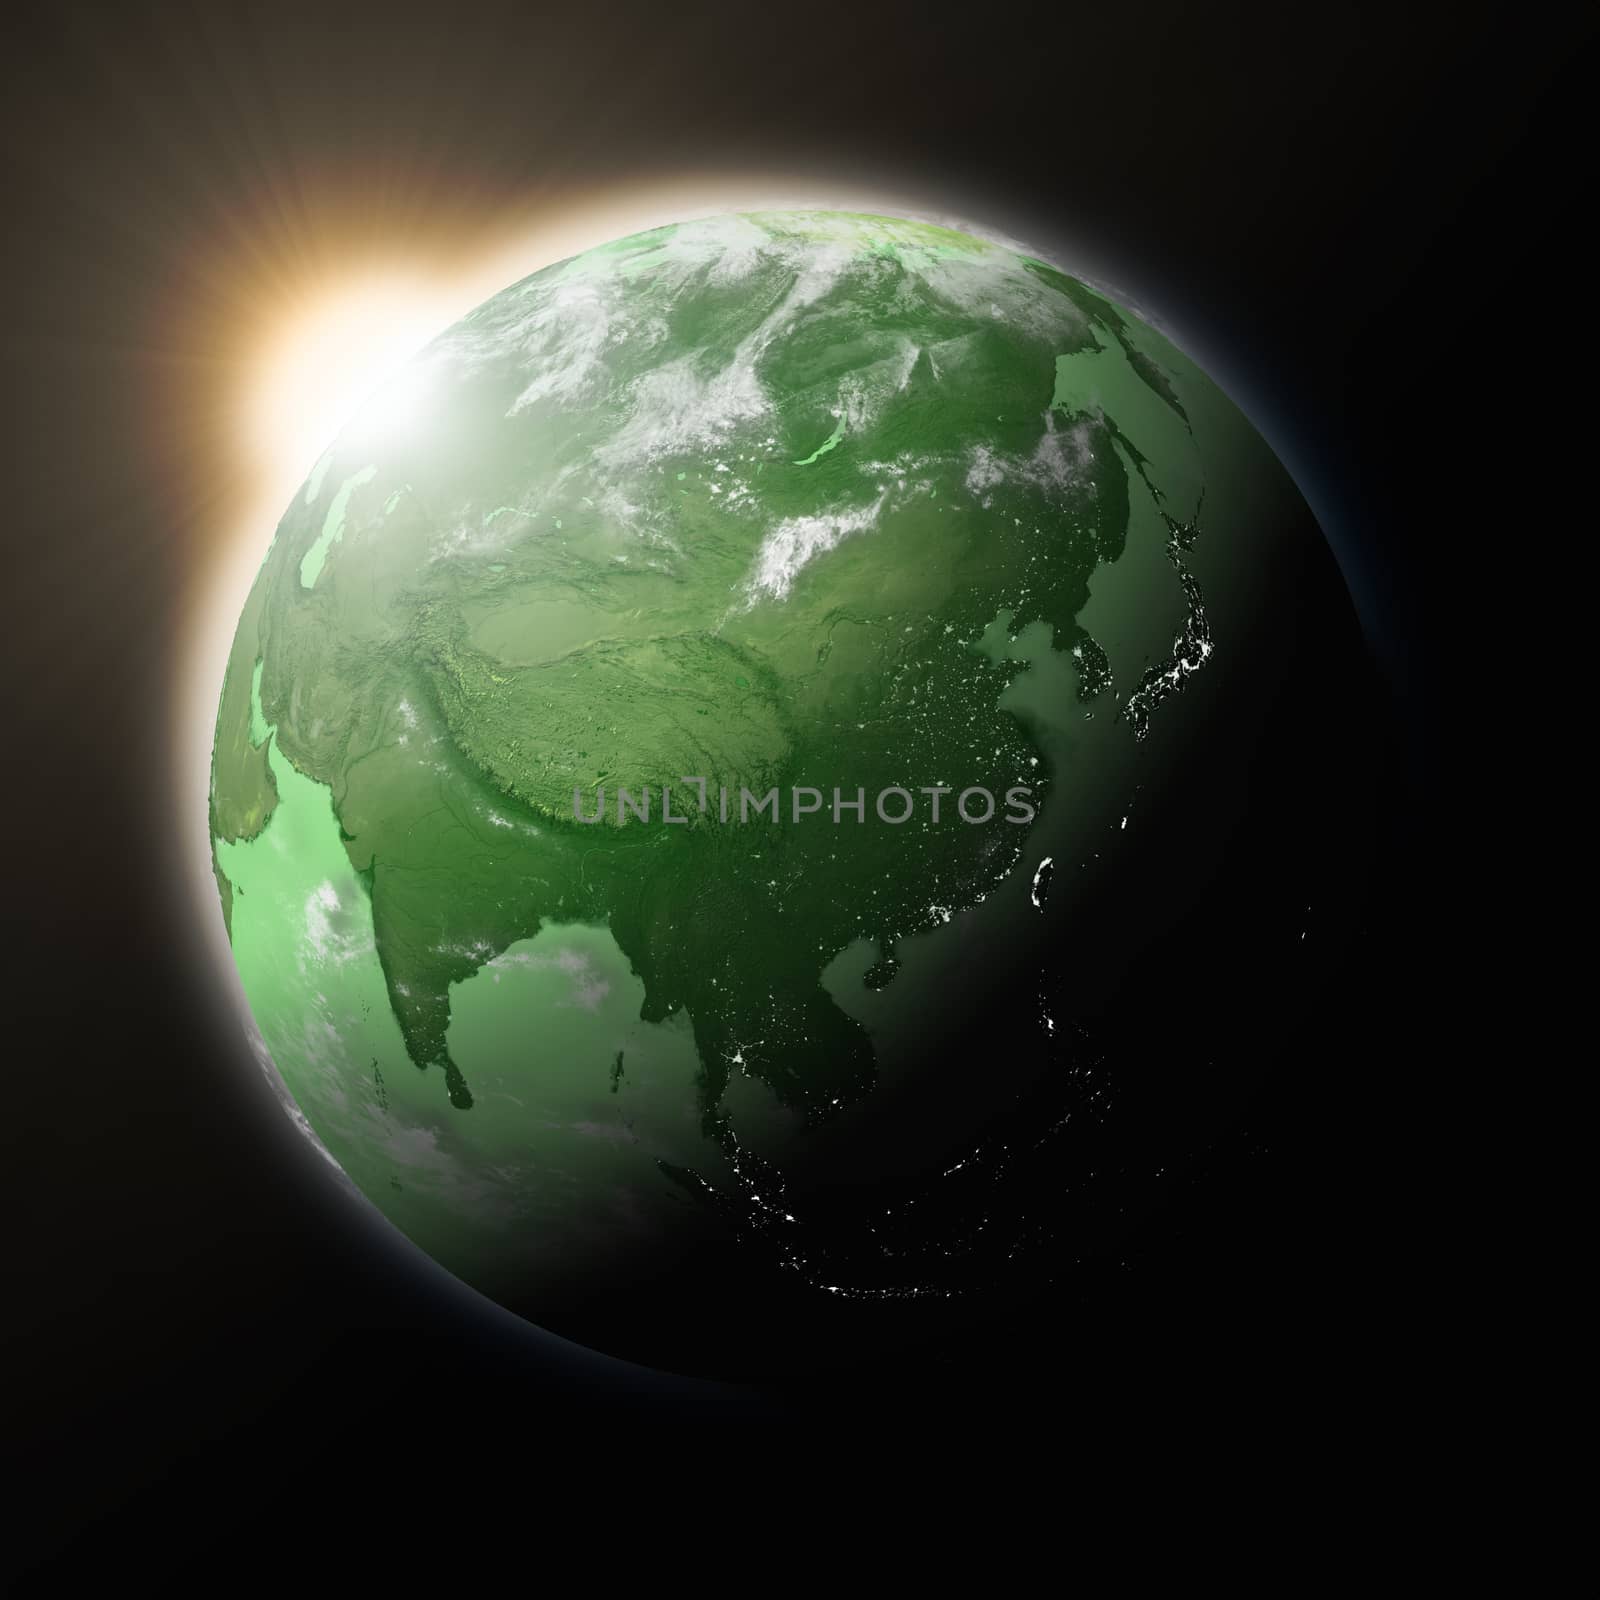 Sun over Southeast Asia on green planet Earth by Harvepino